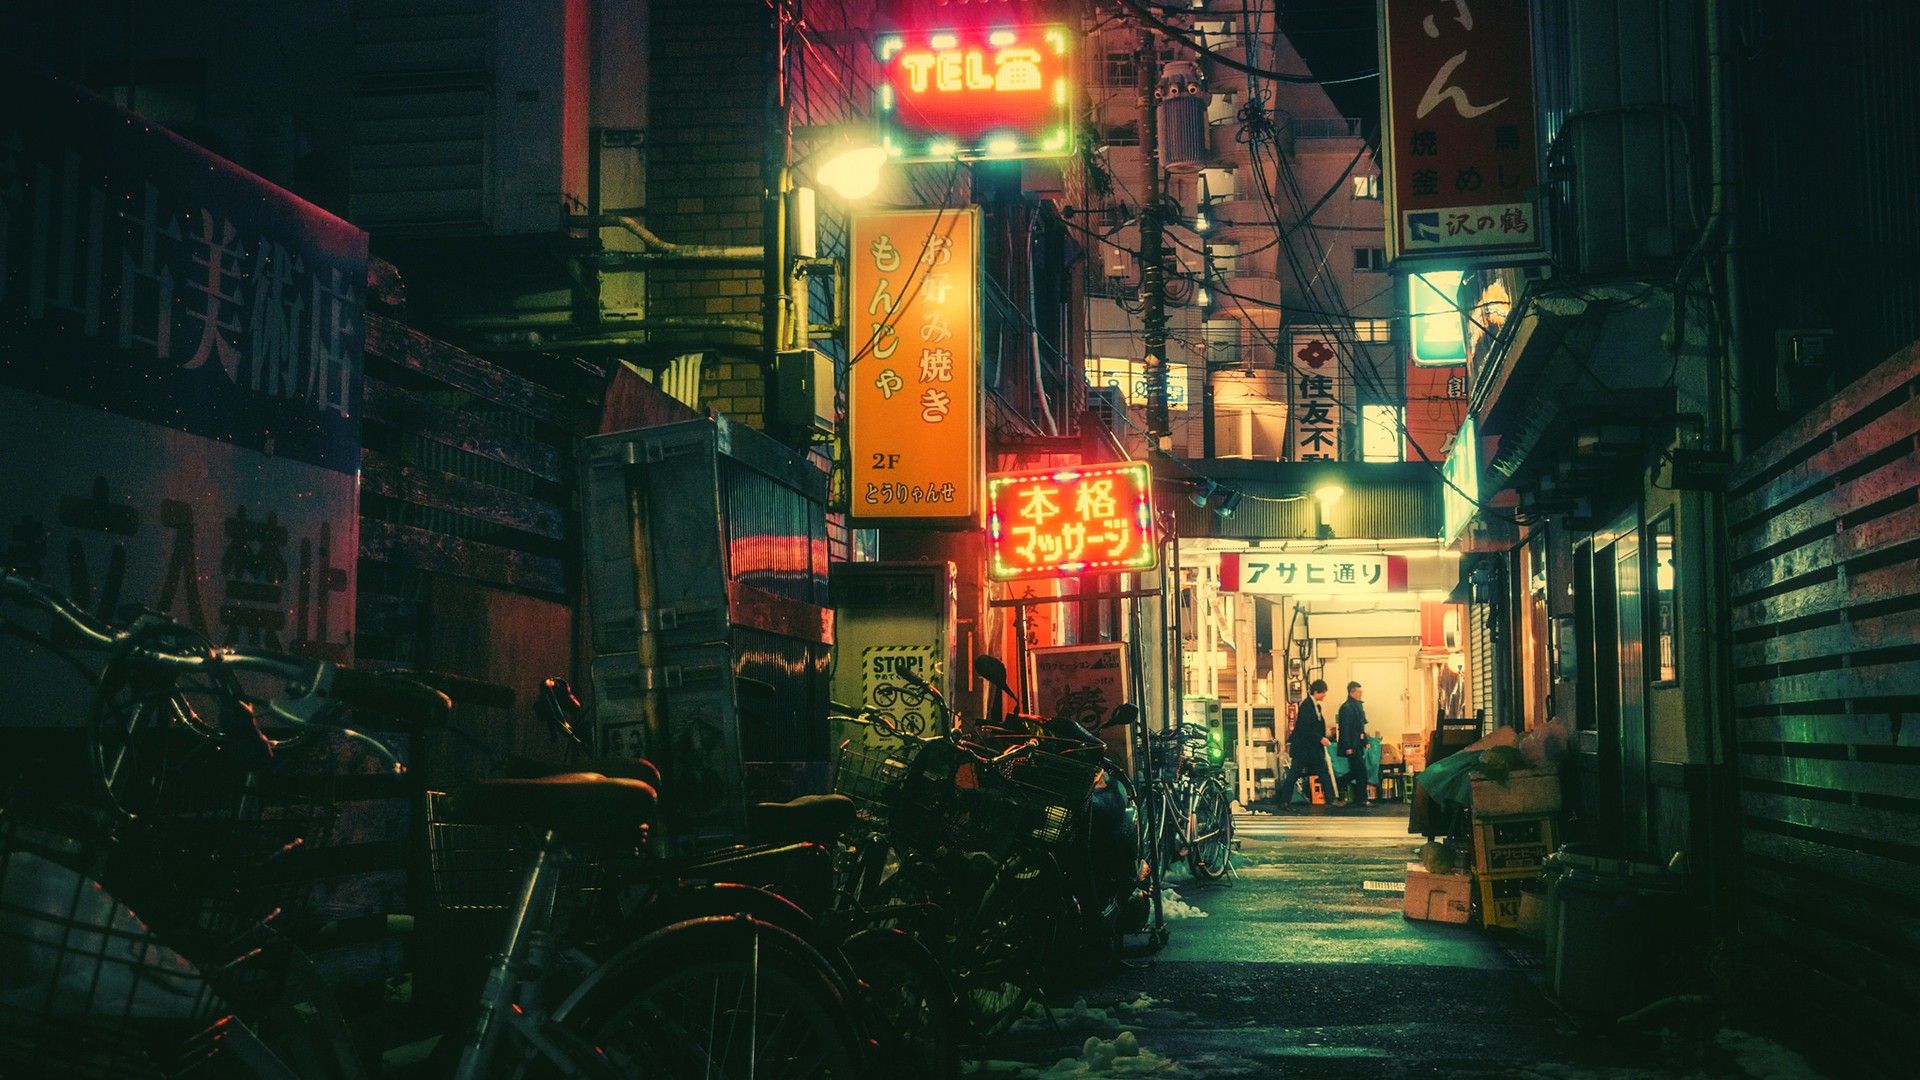 A dark alley with bikes and signs - Tokyo, Japan